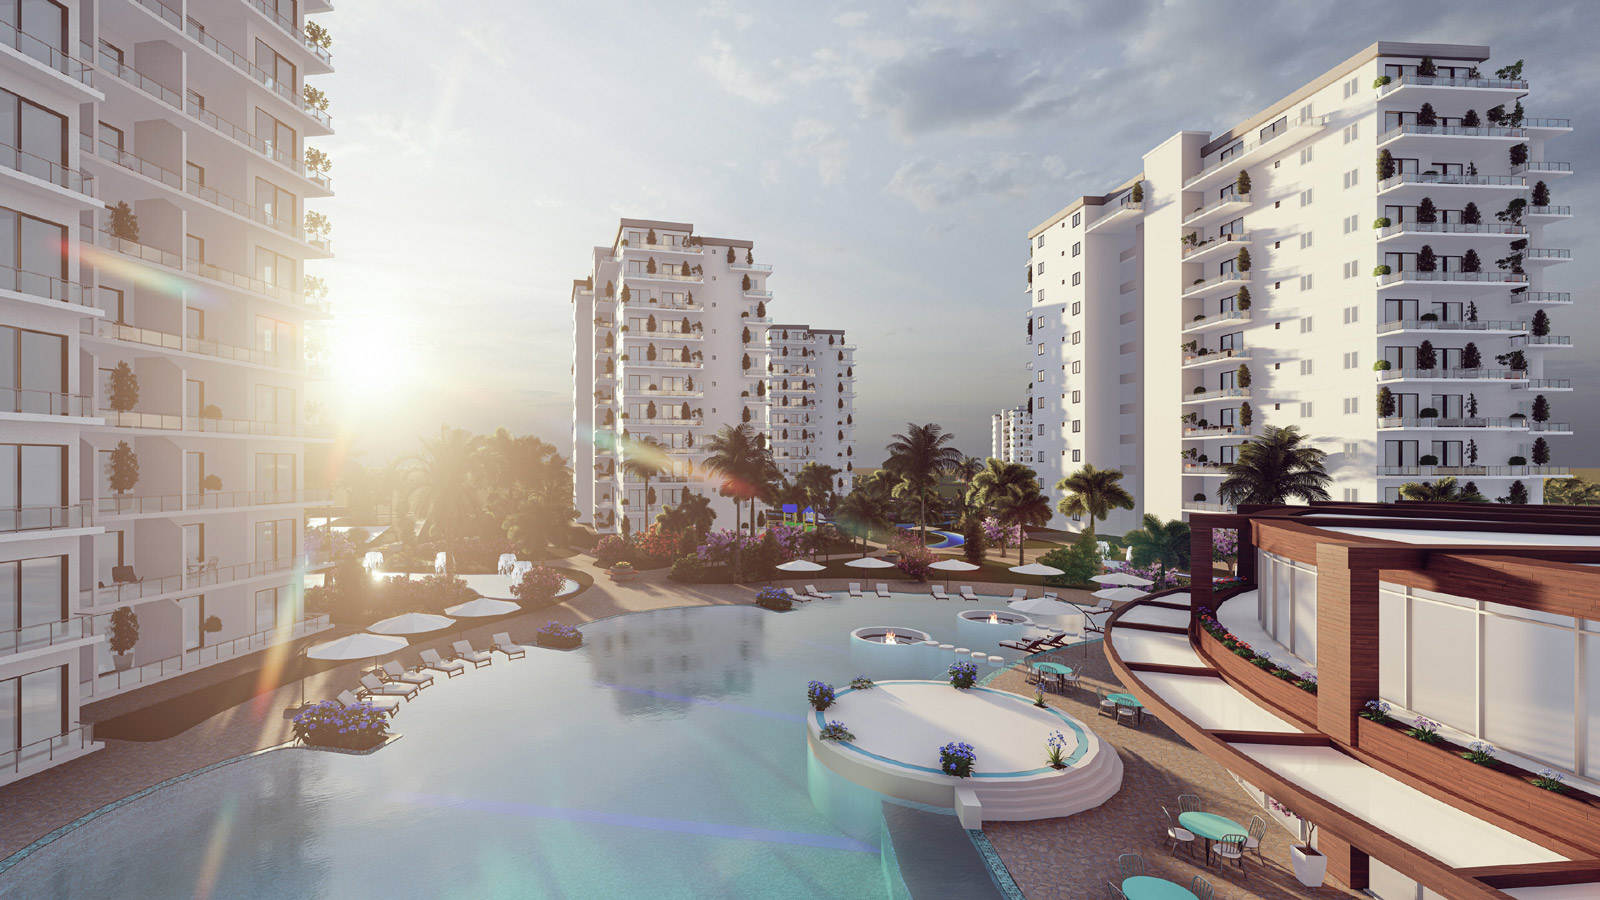 Fantastic 2 Bedroom Apartment 300m from the Beach with Rental Guarantee from £175,000